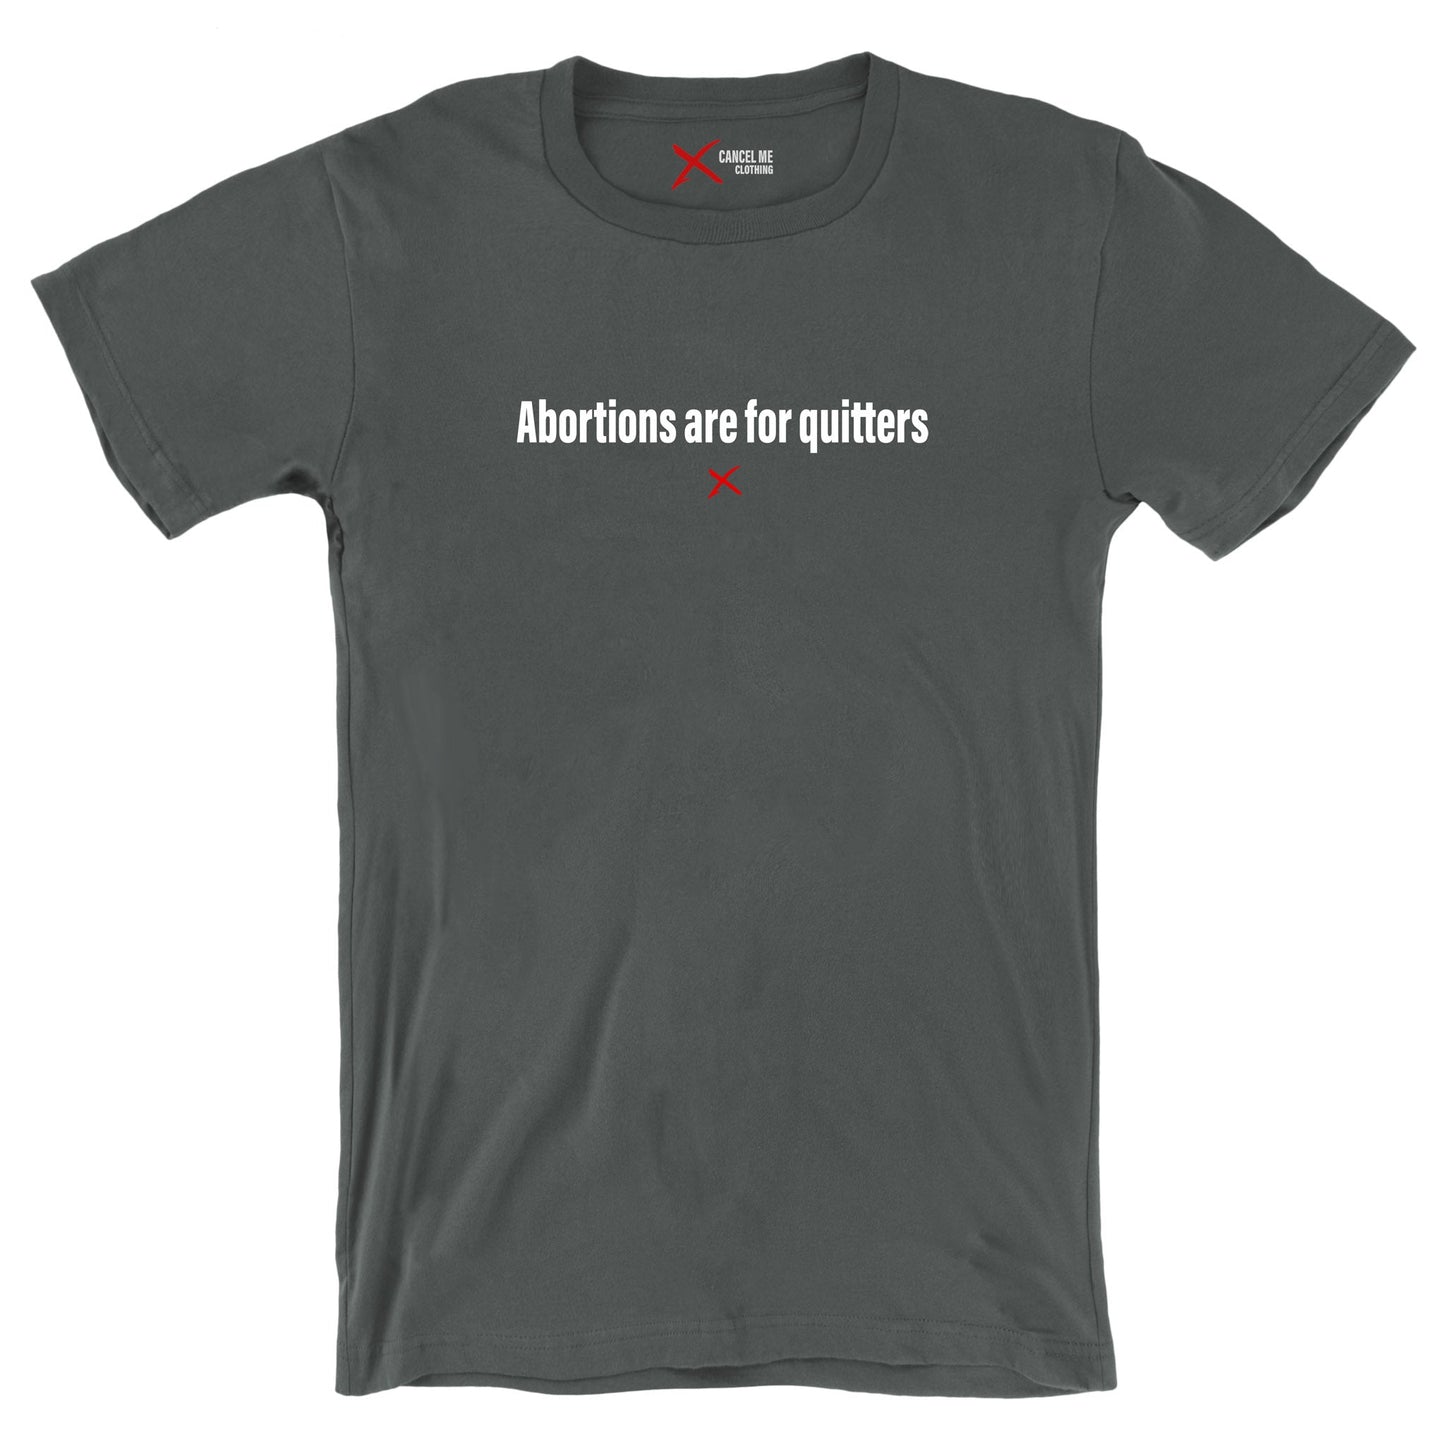 Abortions are for quitters - Shirt